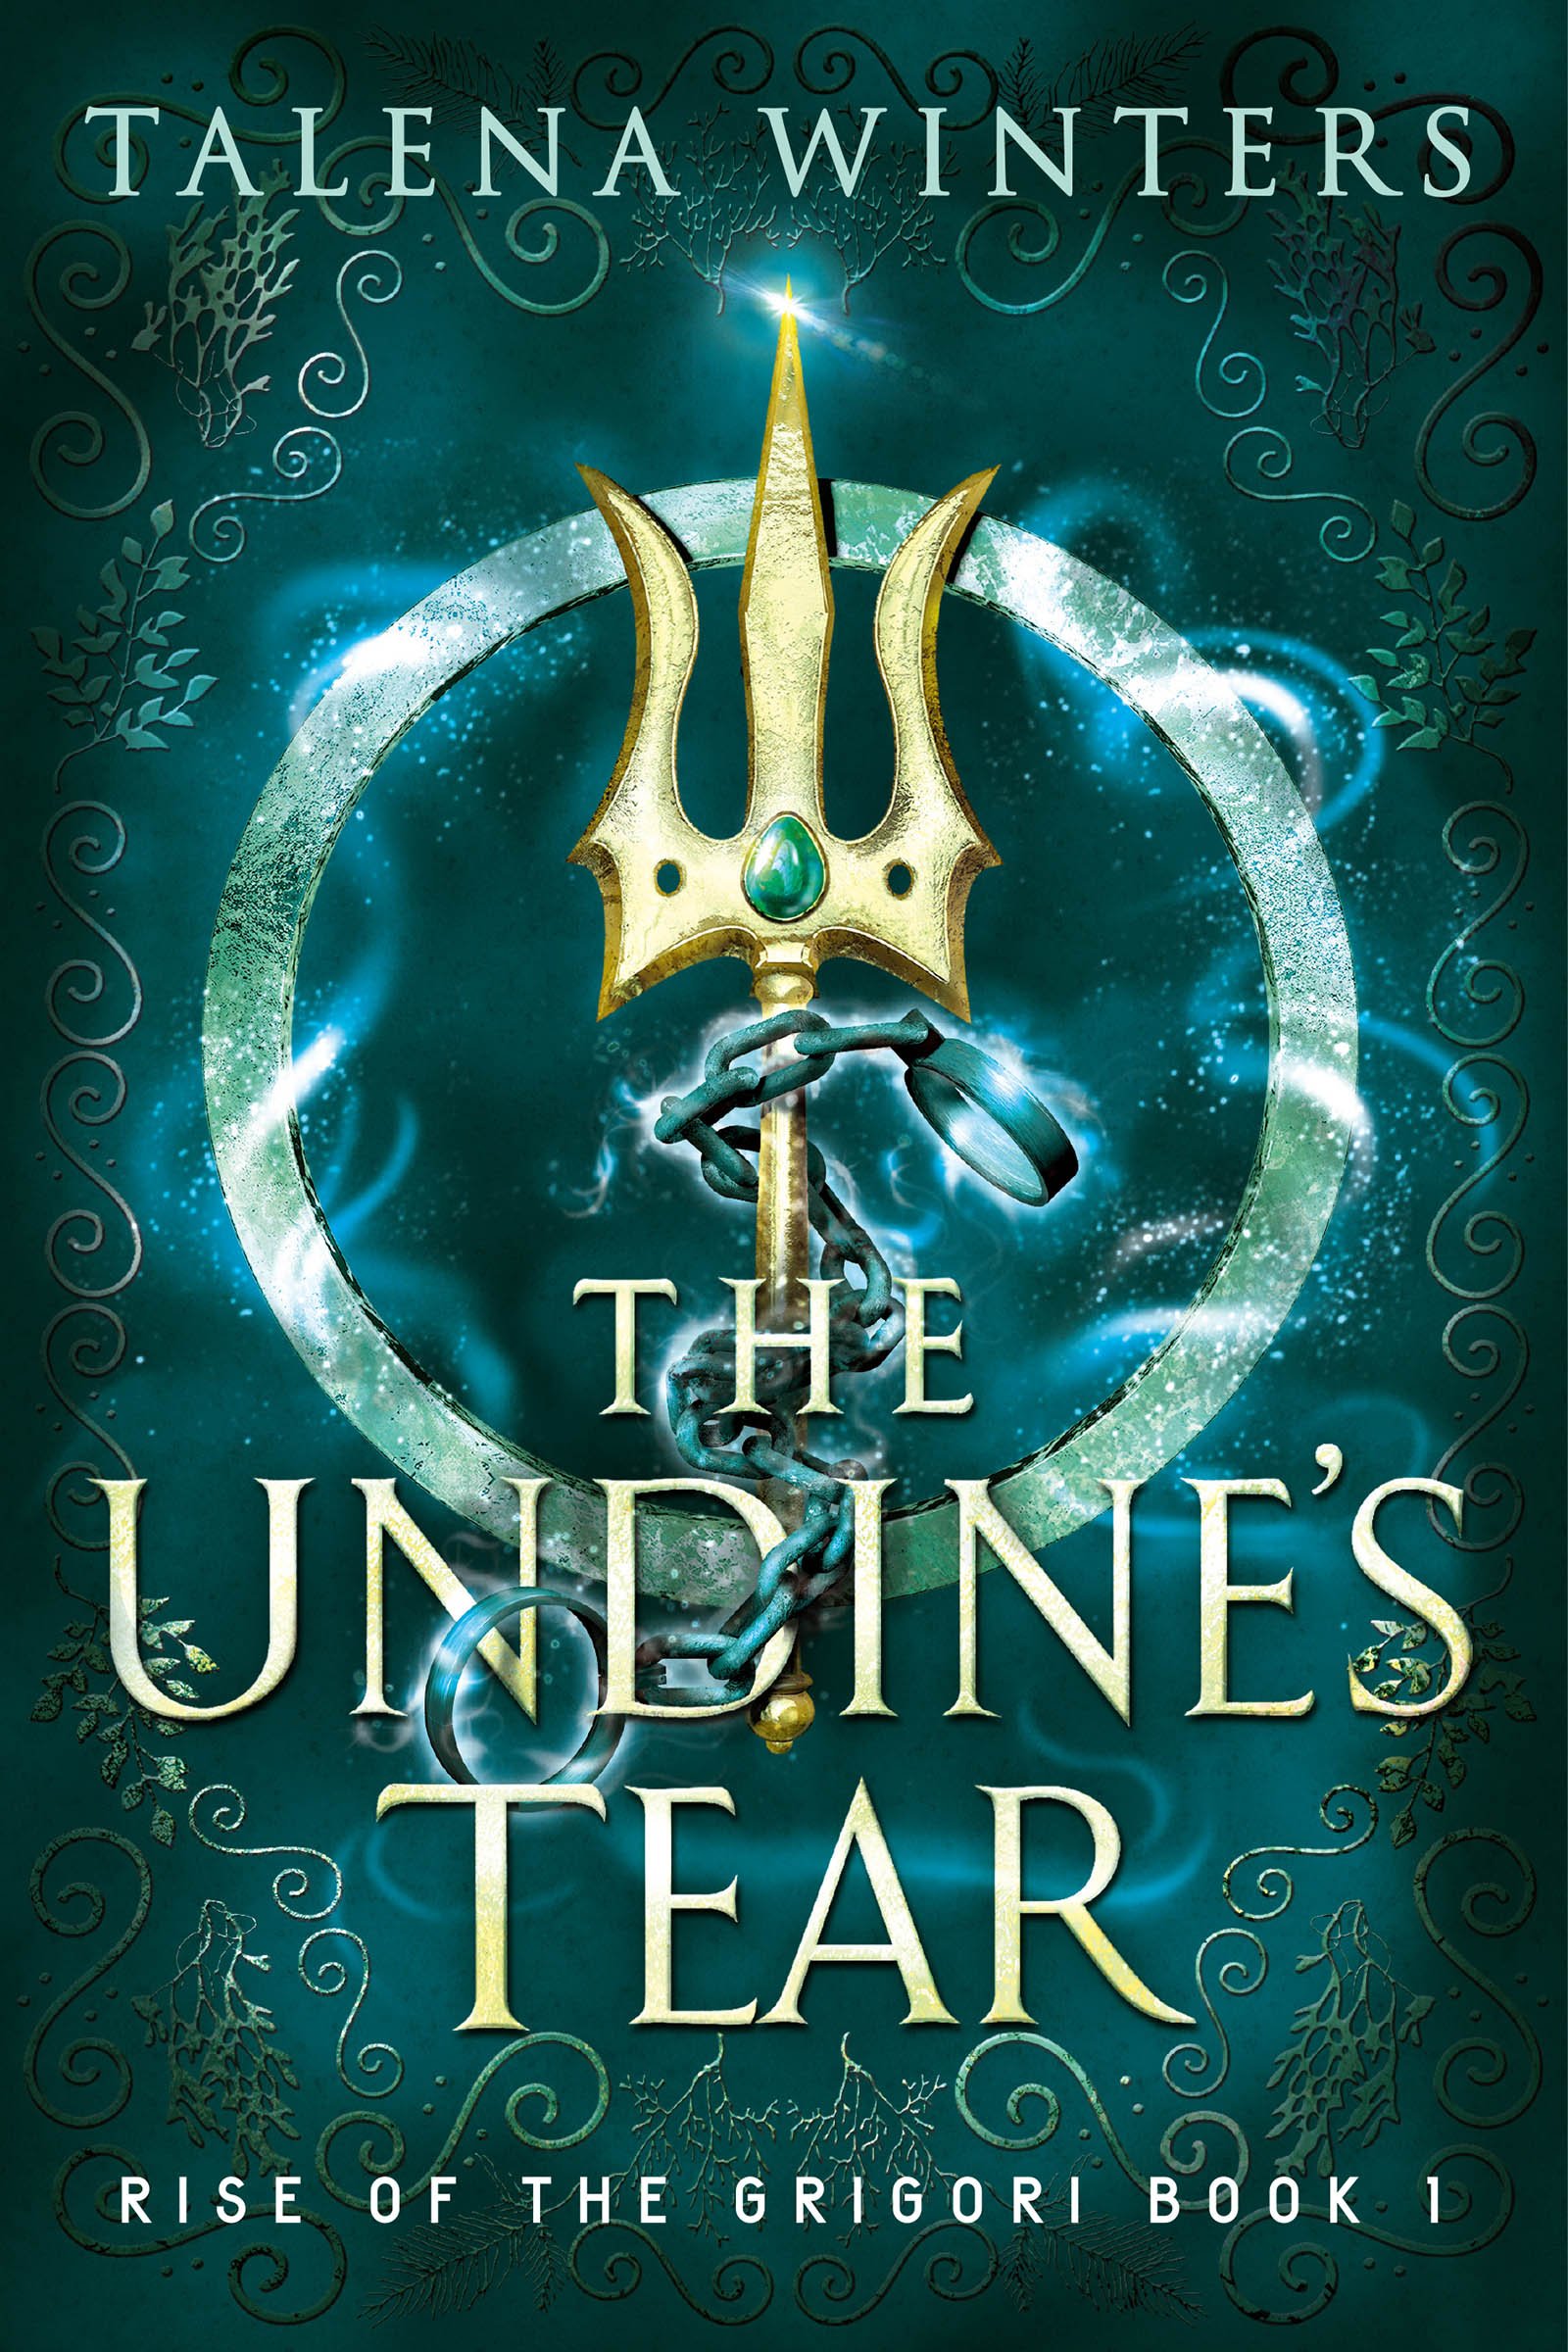 Current cover for The Undine's Tear with the Tear on the trident